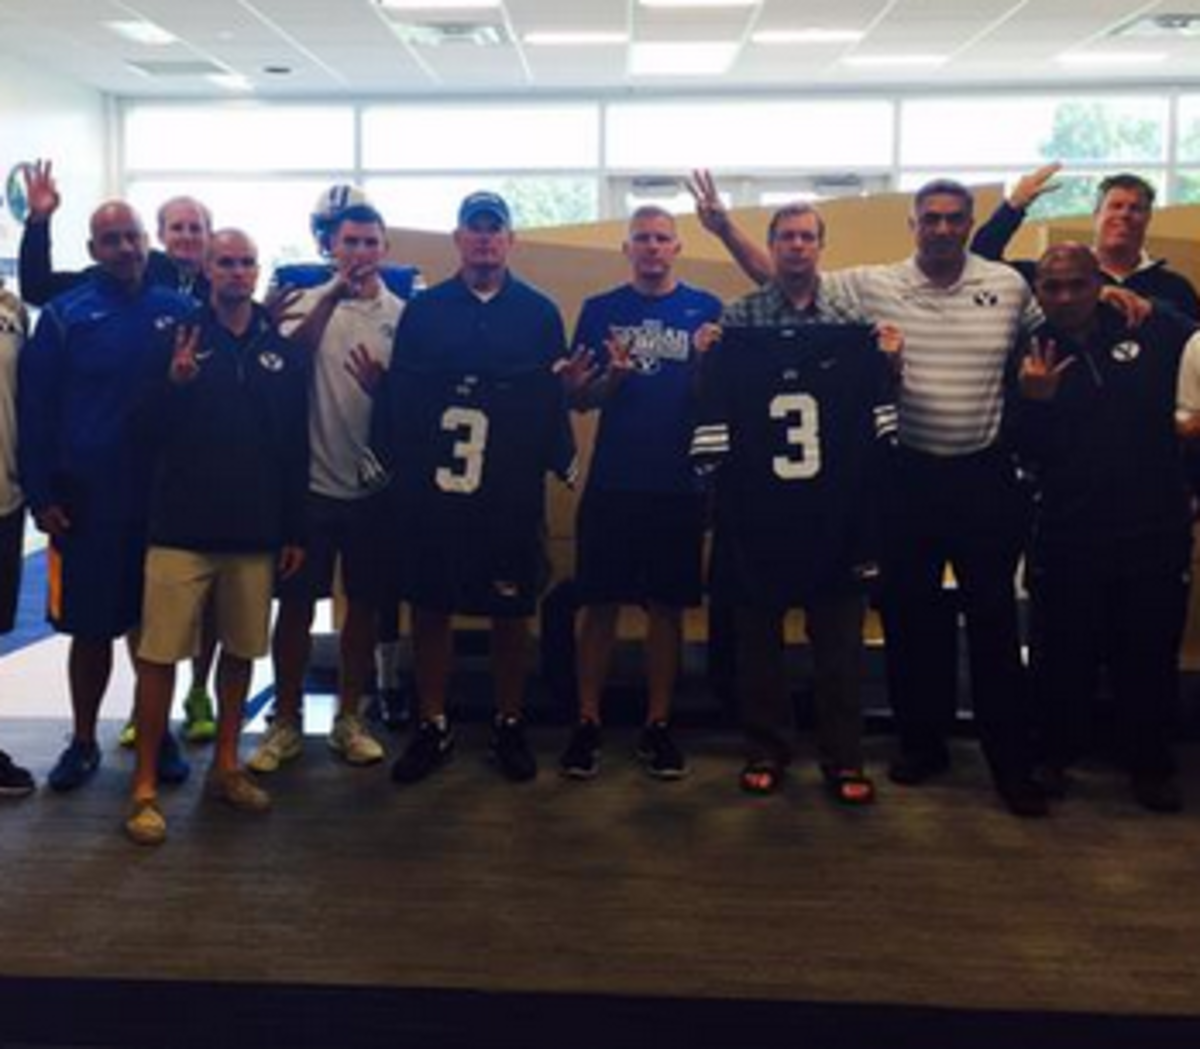 BYU football players honor 9-year-old after tragic accident.